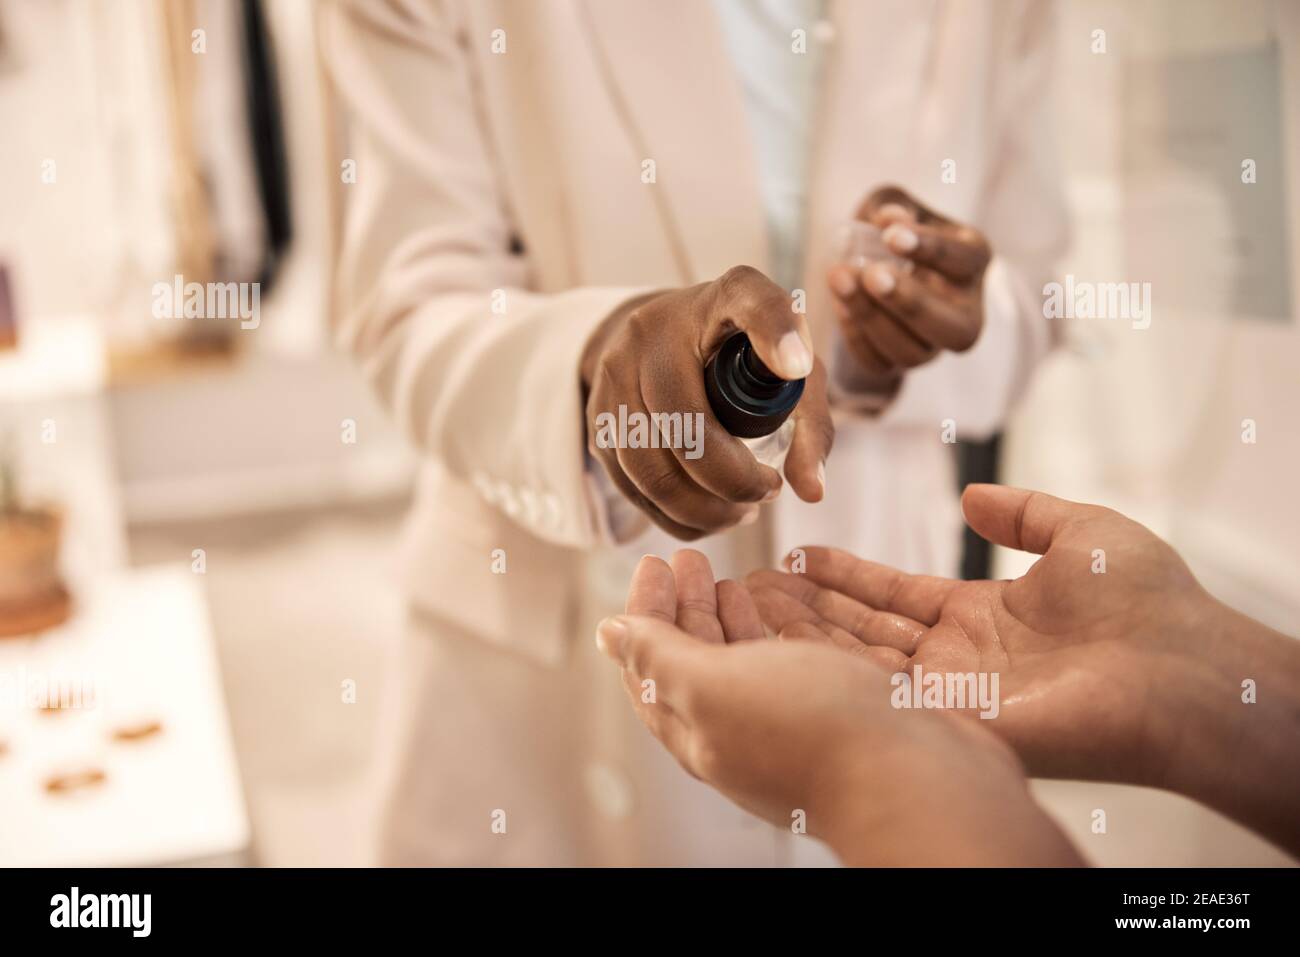 African American store owner spraying a customer's hands with sanitizer Stock Photo